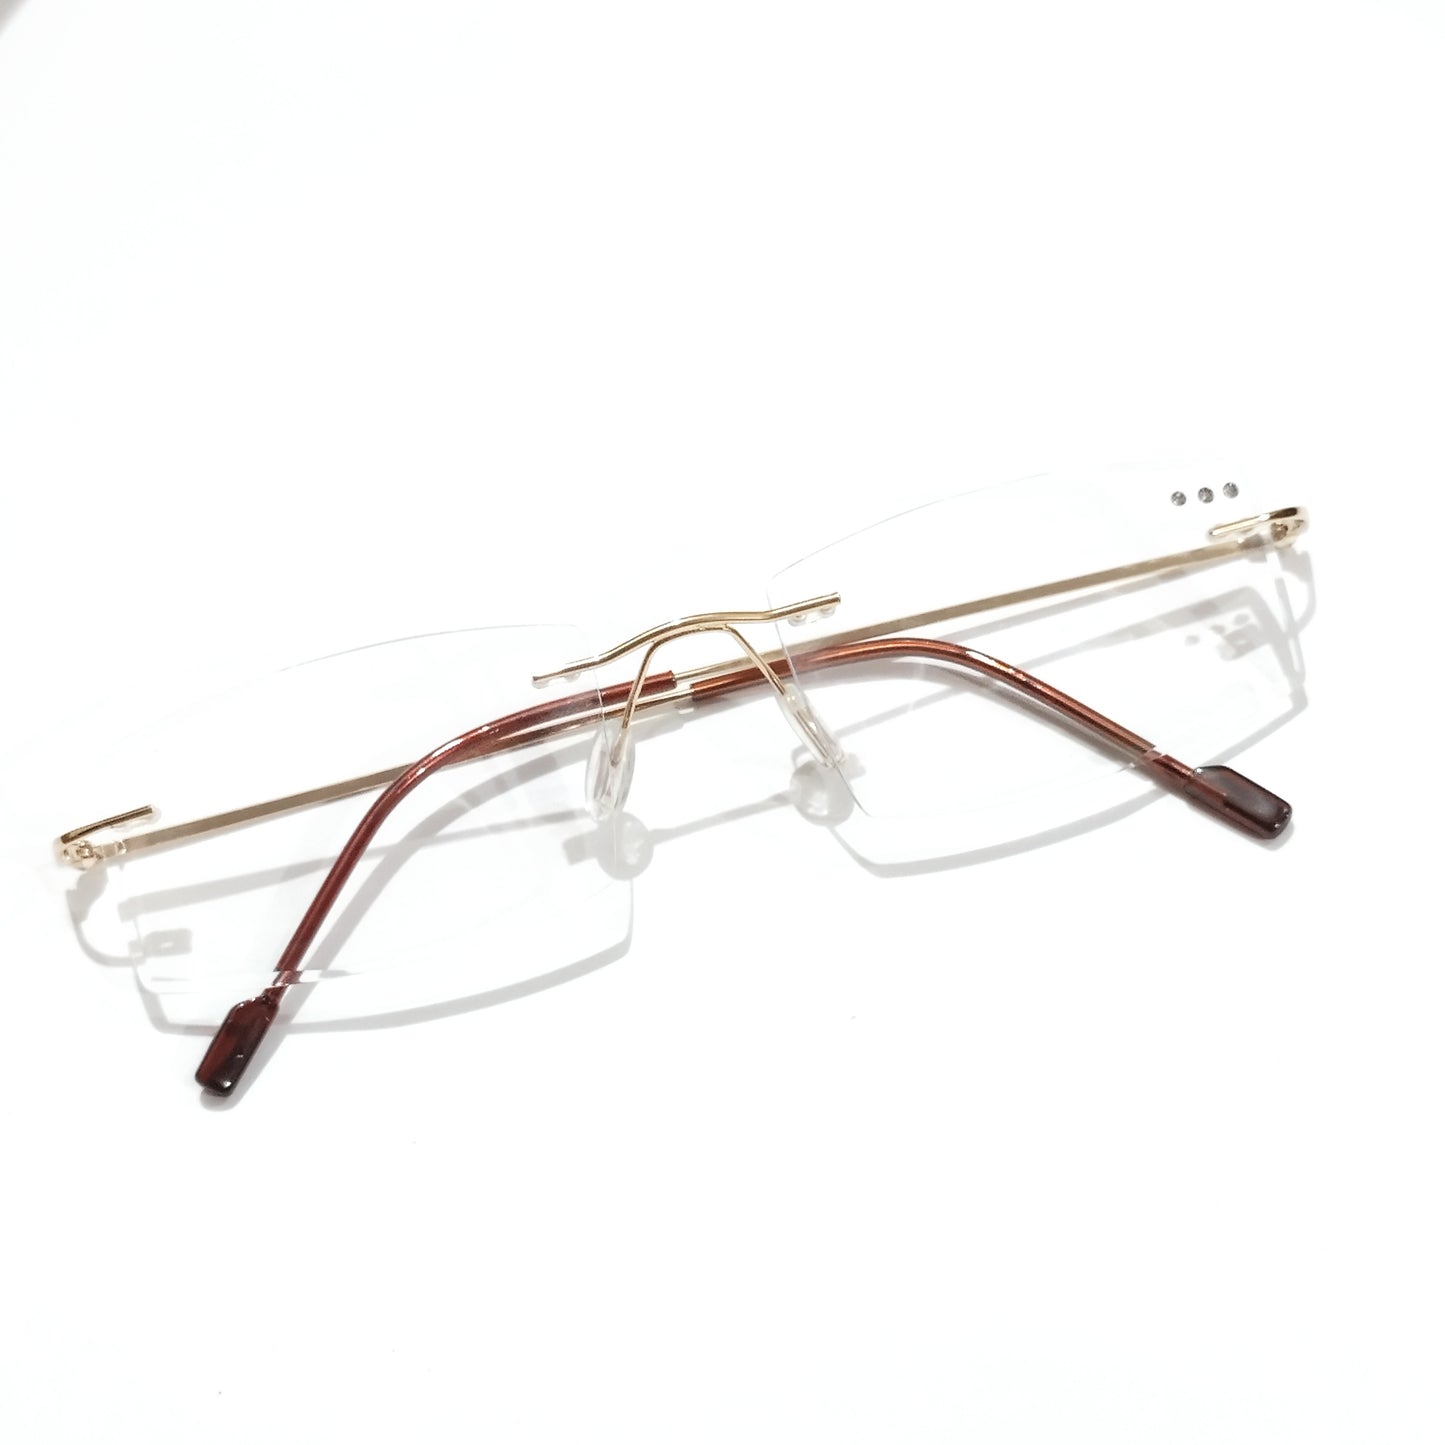 Gold Rimless Executive Glasses with Laser Cut Edges and Left Lens Design